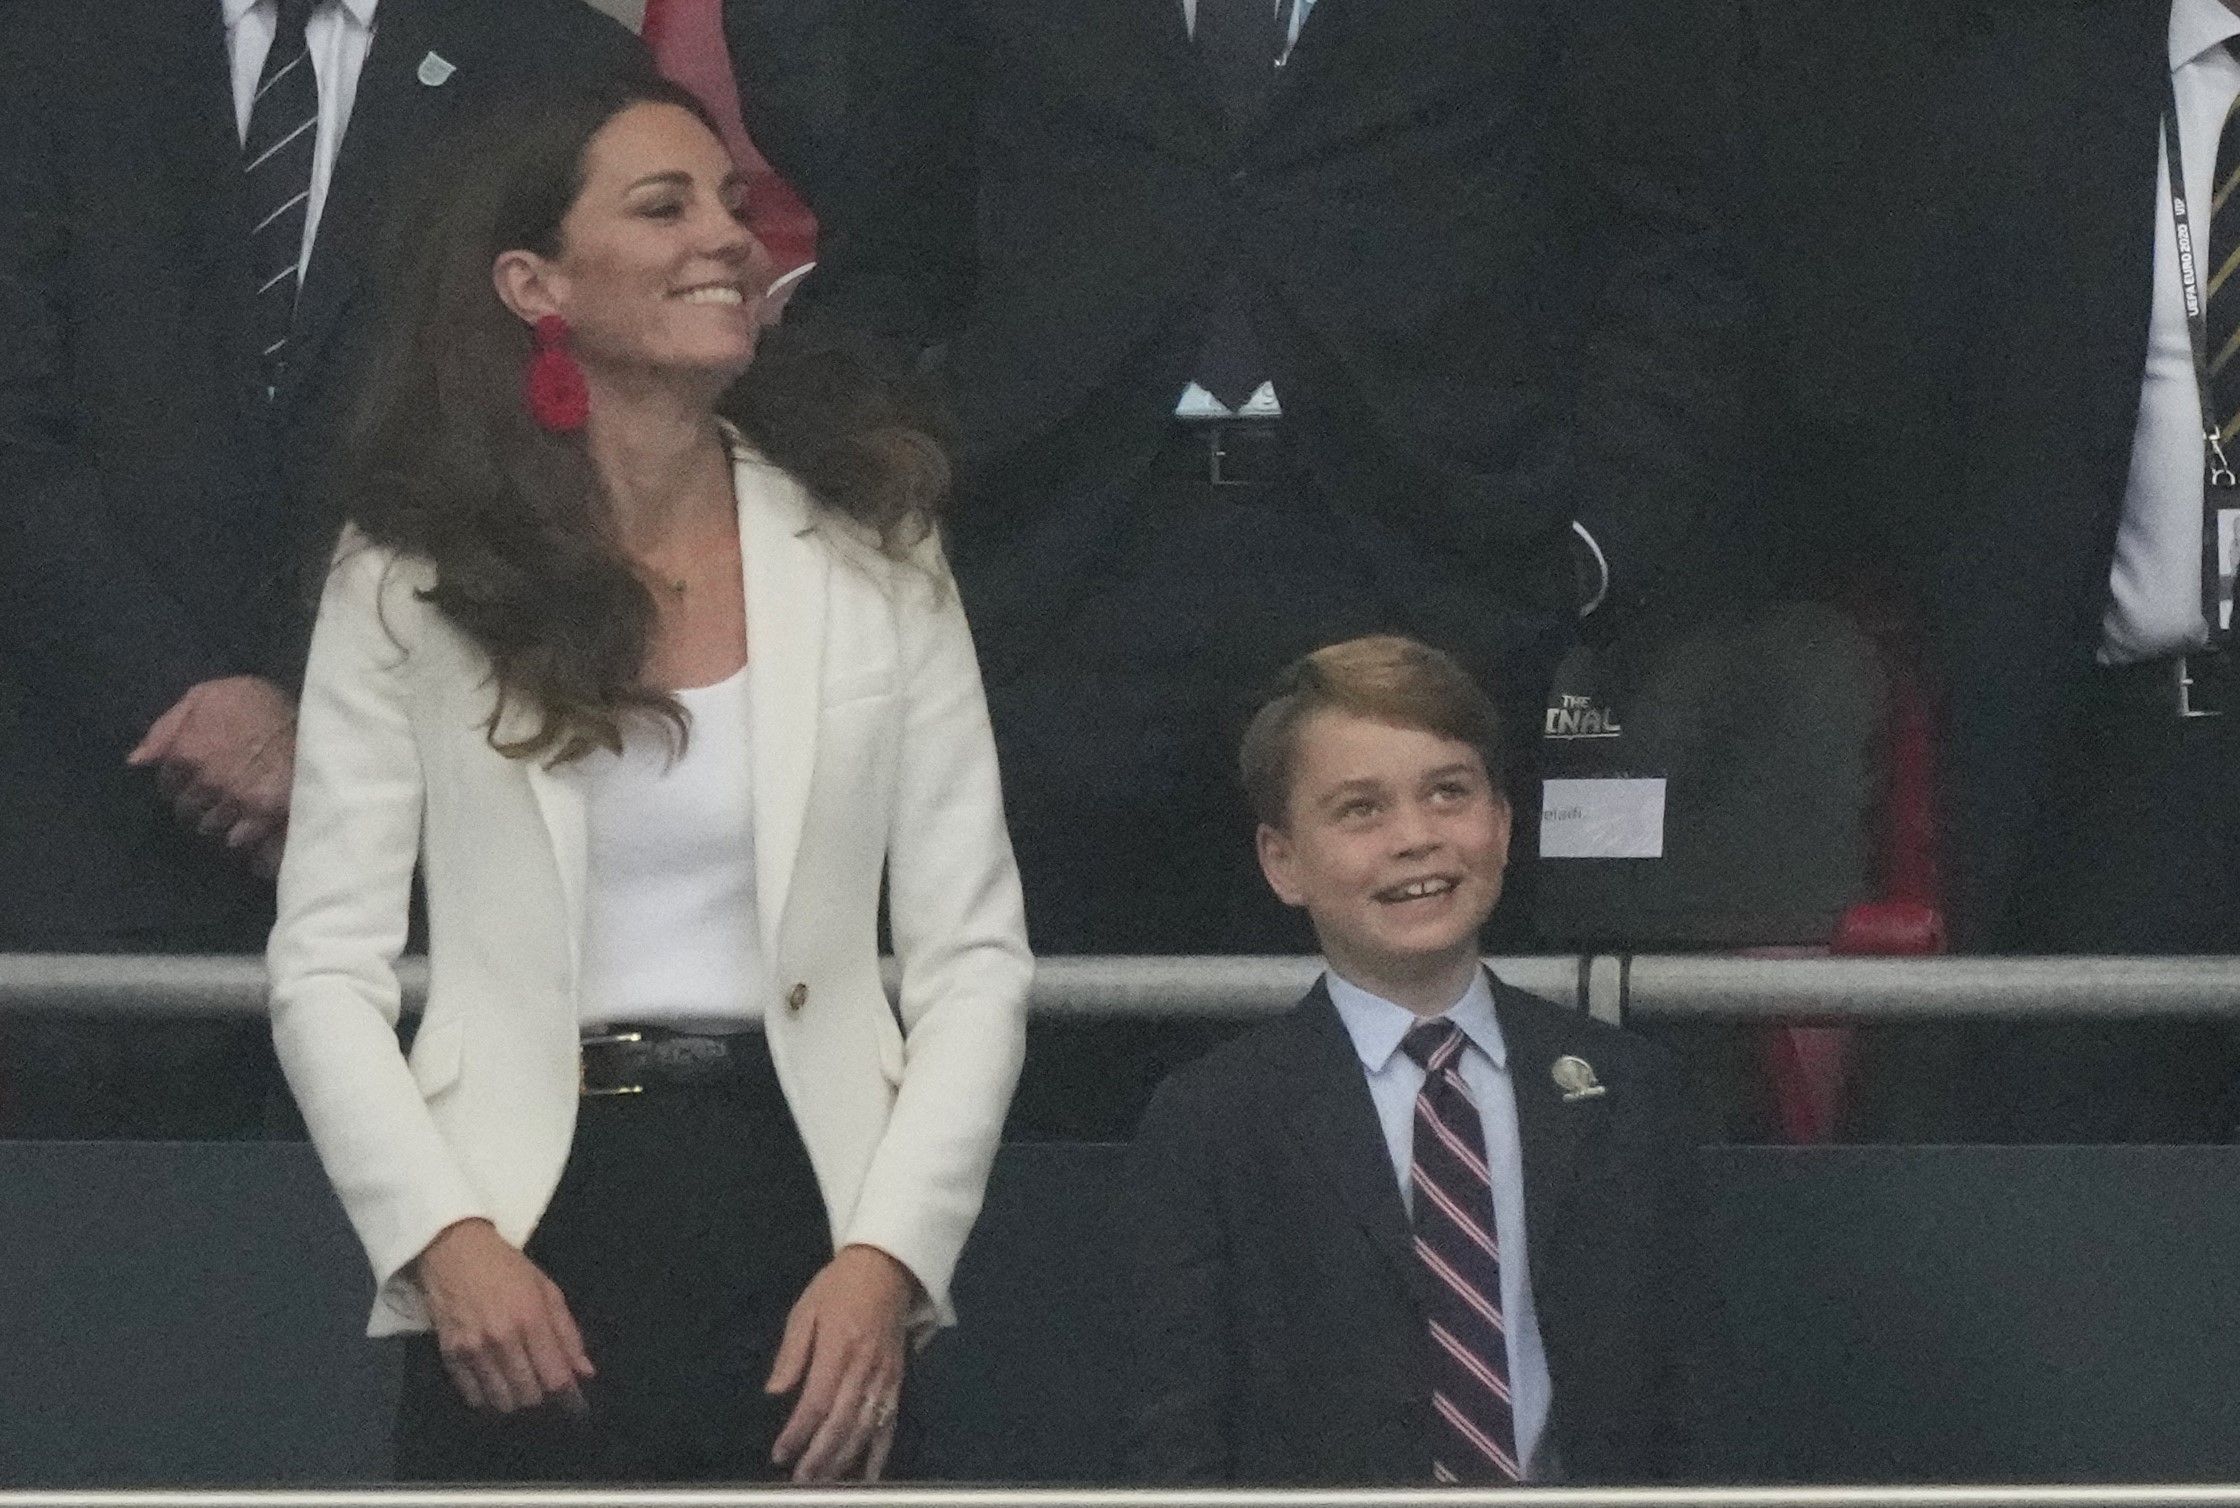 Prince George smiling alongside his mom, Kate Middleton, during the UEFA EURO 2020 final football match between Italy and England at the Wembley Stadium on July 11, 2021